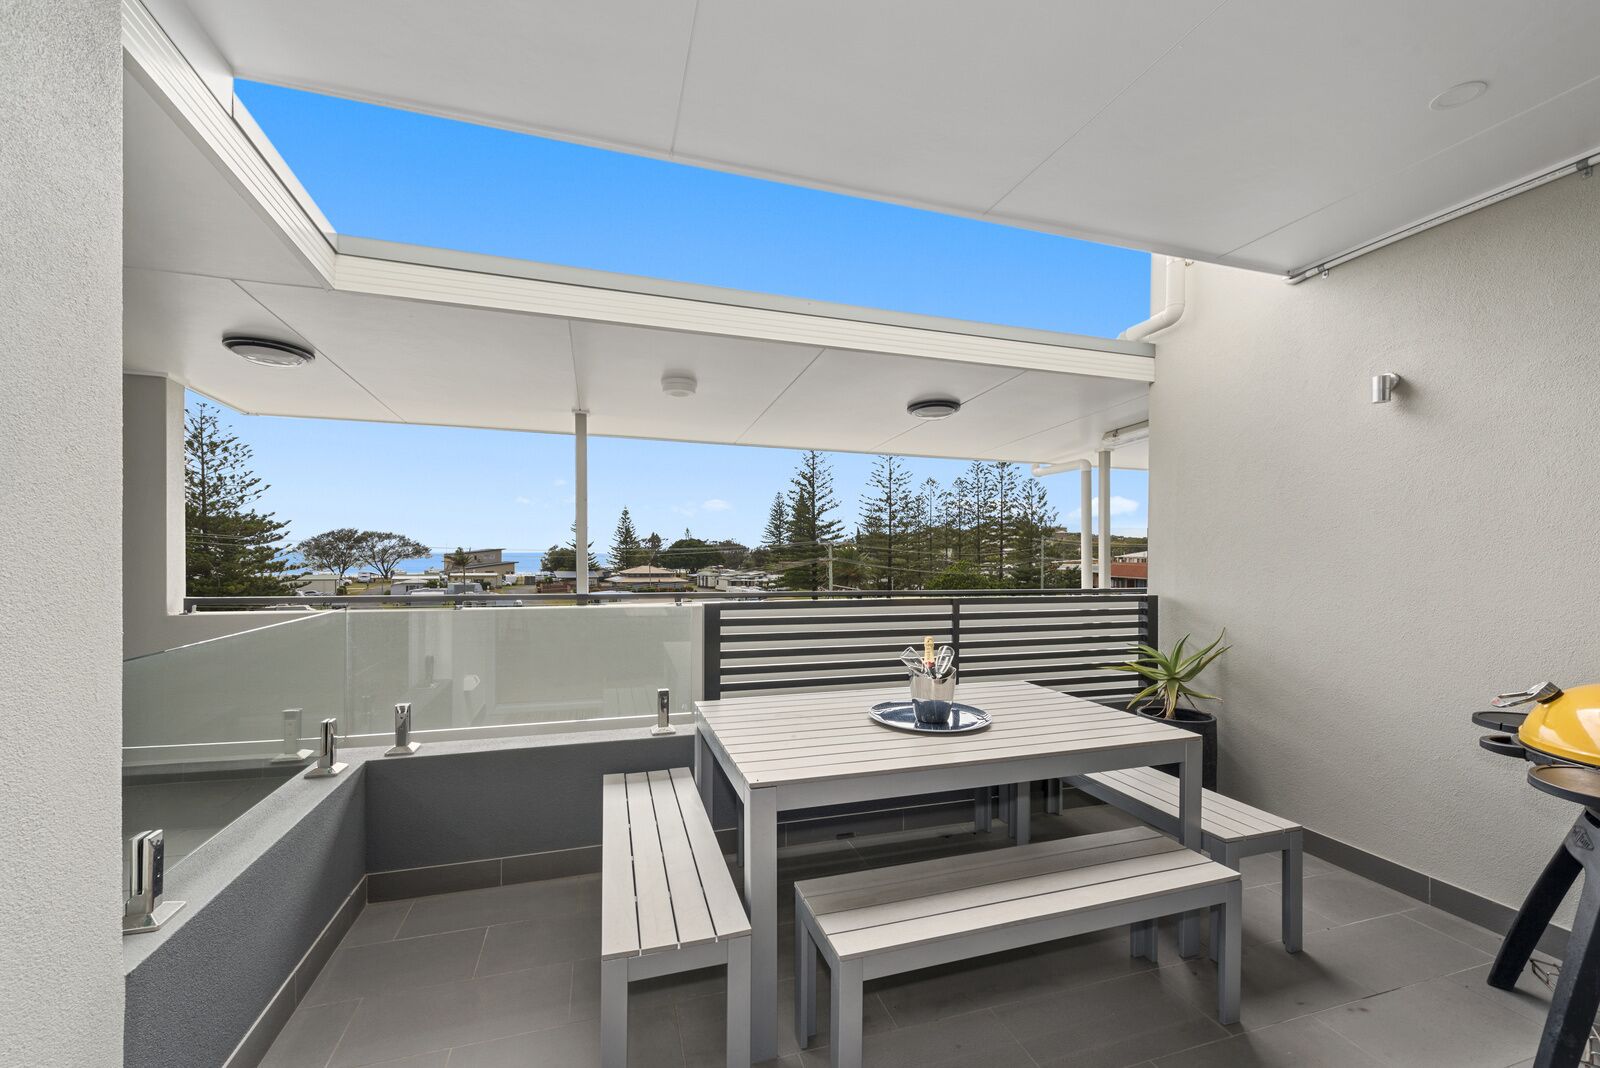 Fifty Meters to the Beach in the Heart of Woolgoolg